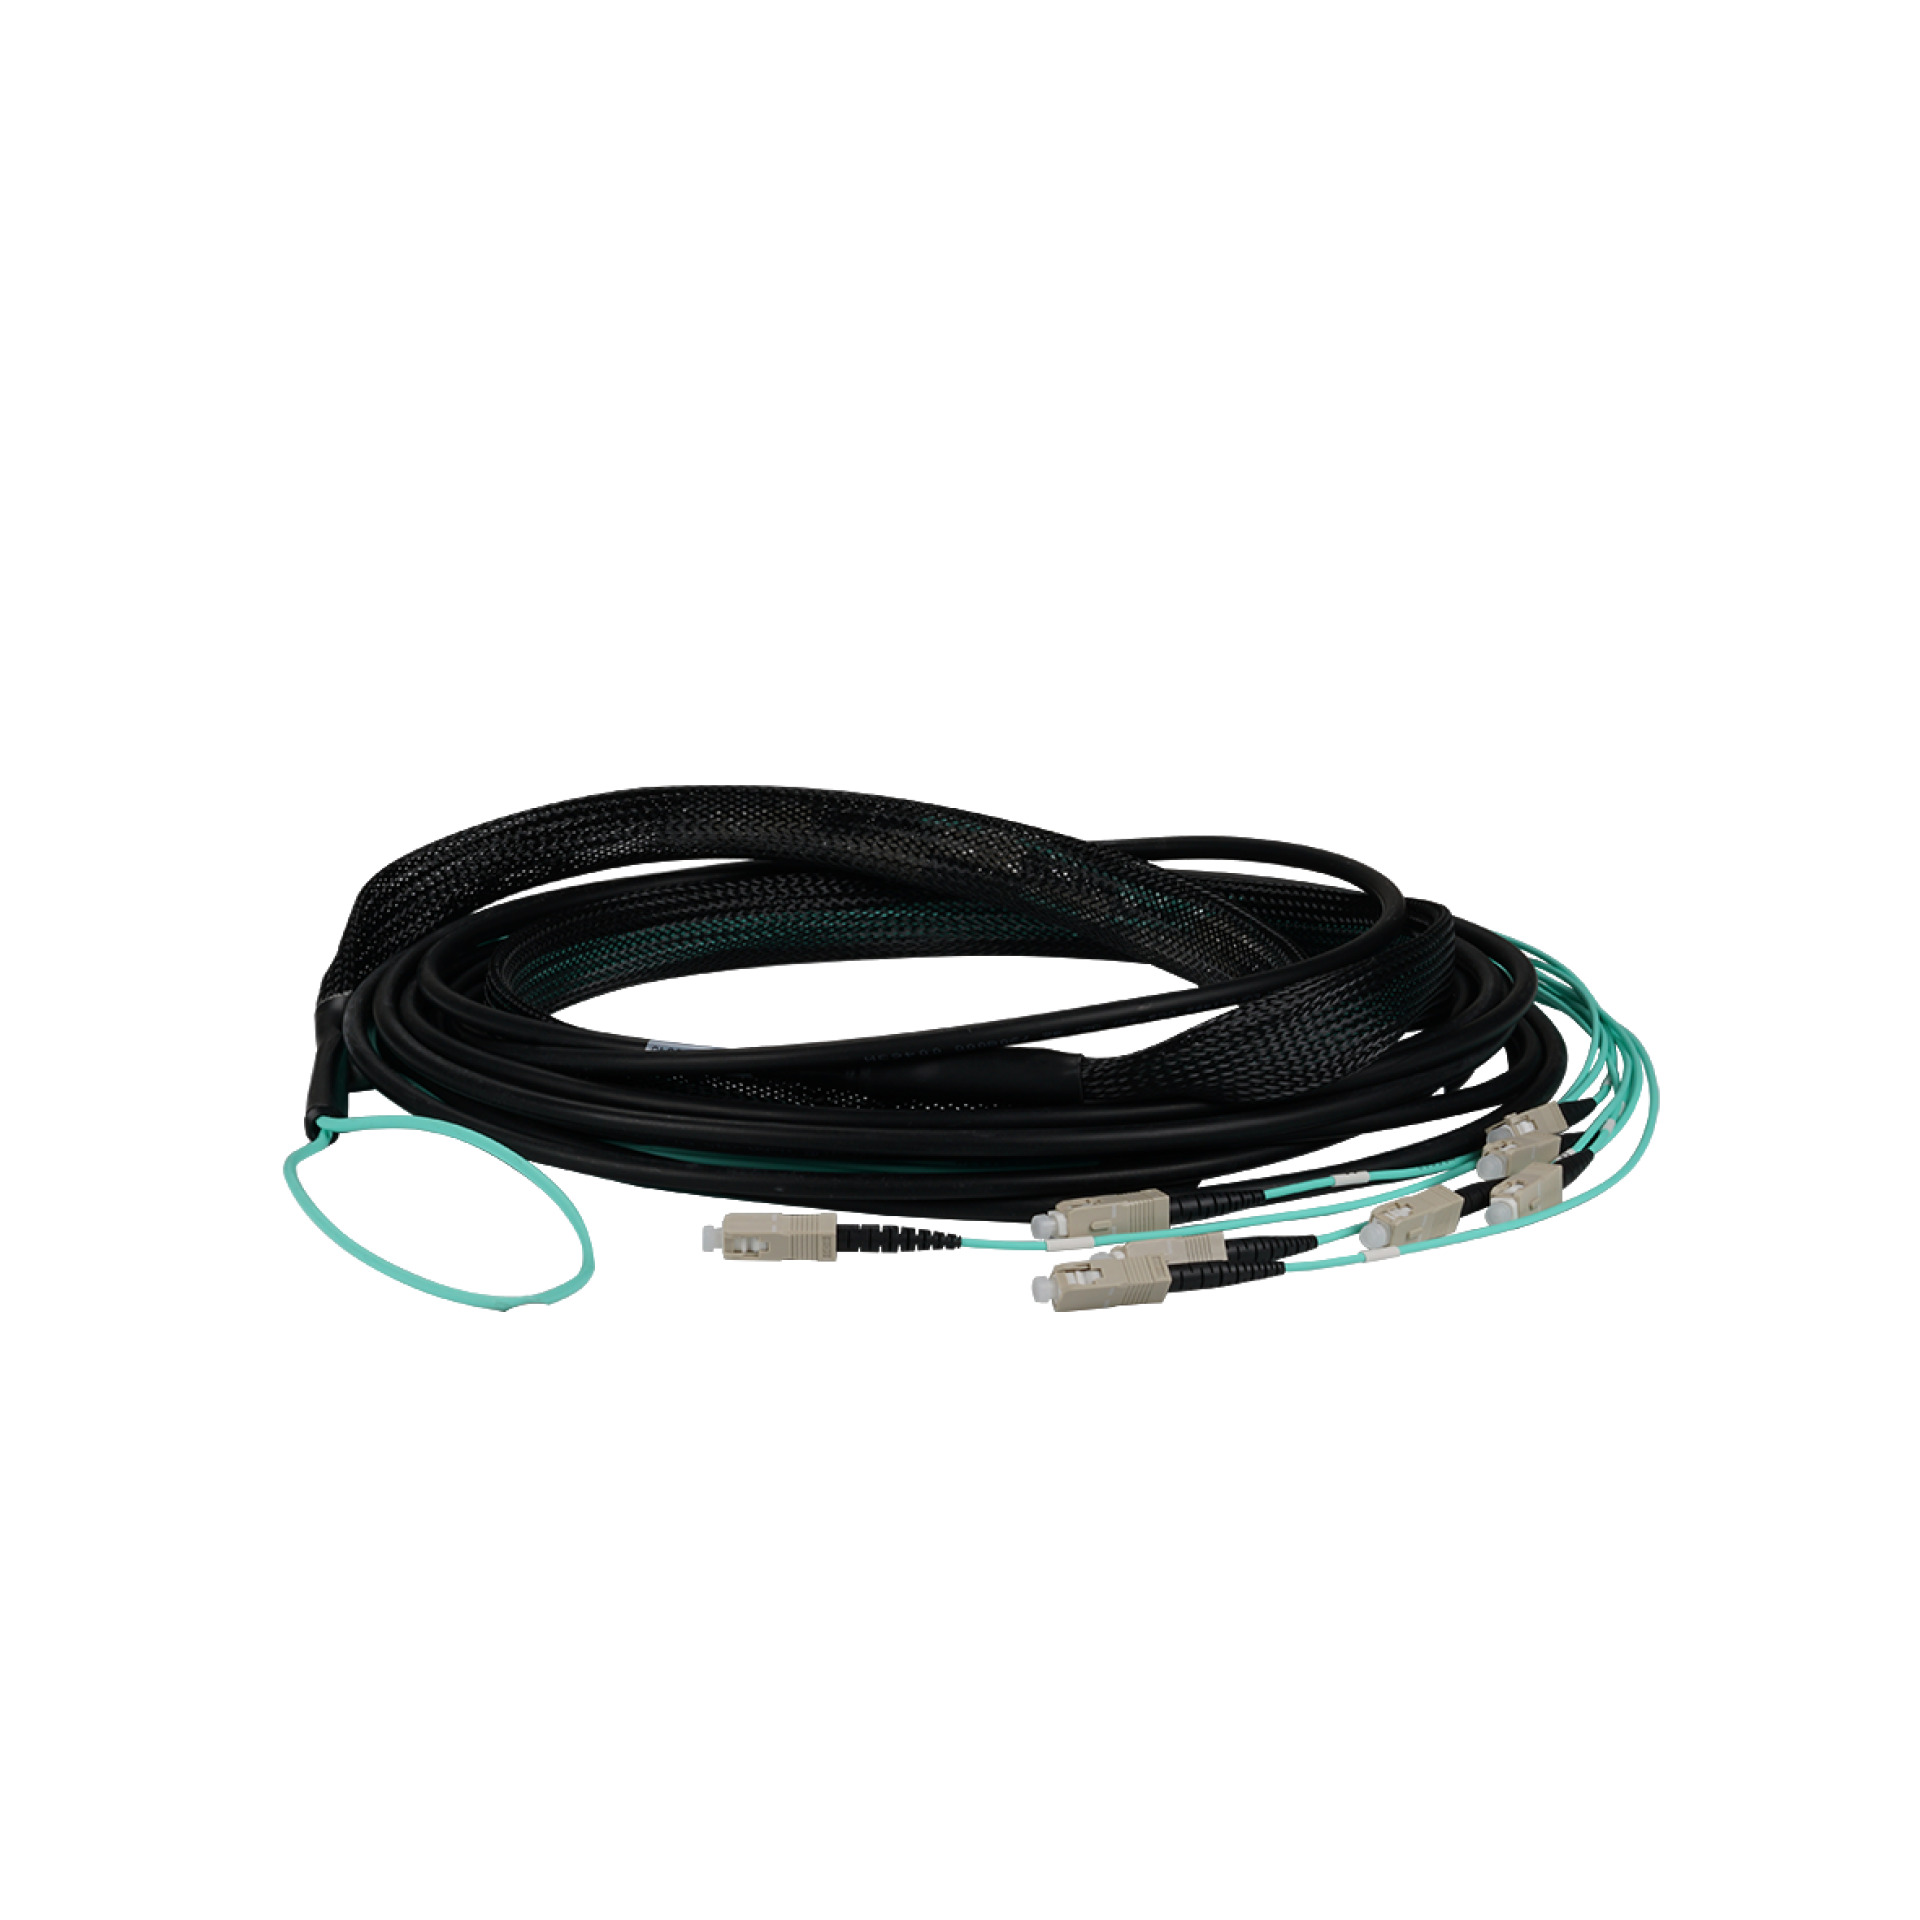 Trunk cable U-DQ(ZN)BH 8G 50/125, SC/SC OM3 50m